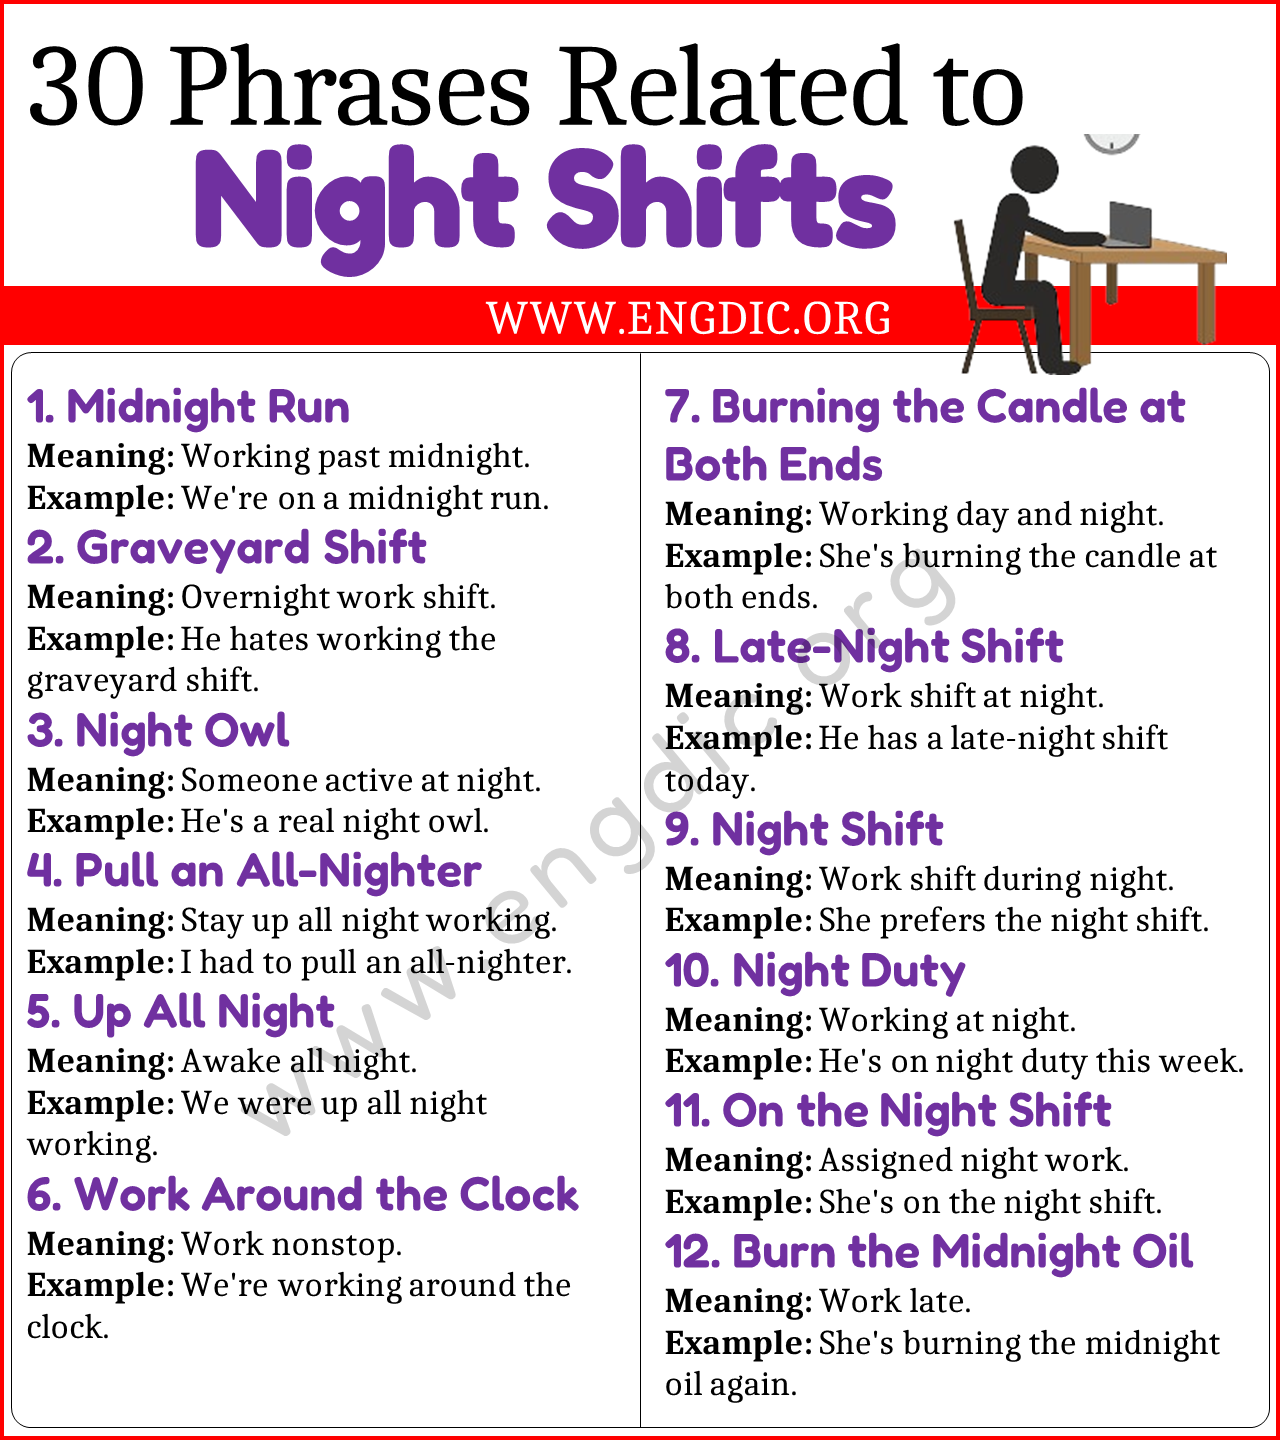 Phrases Related to Night Shifts